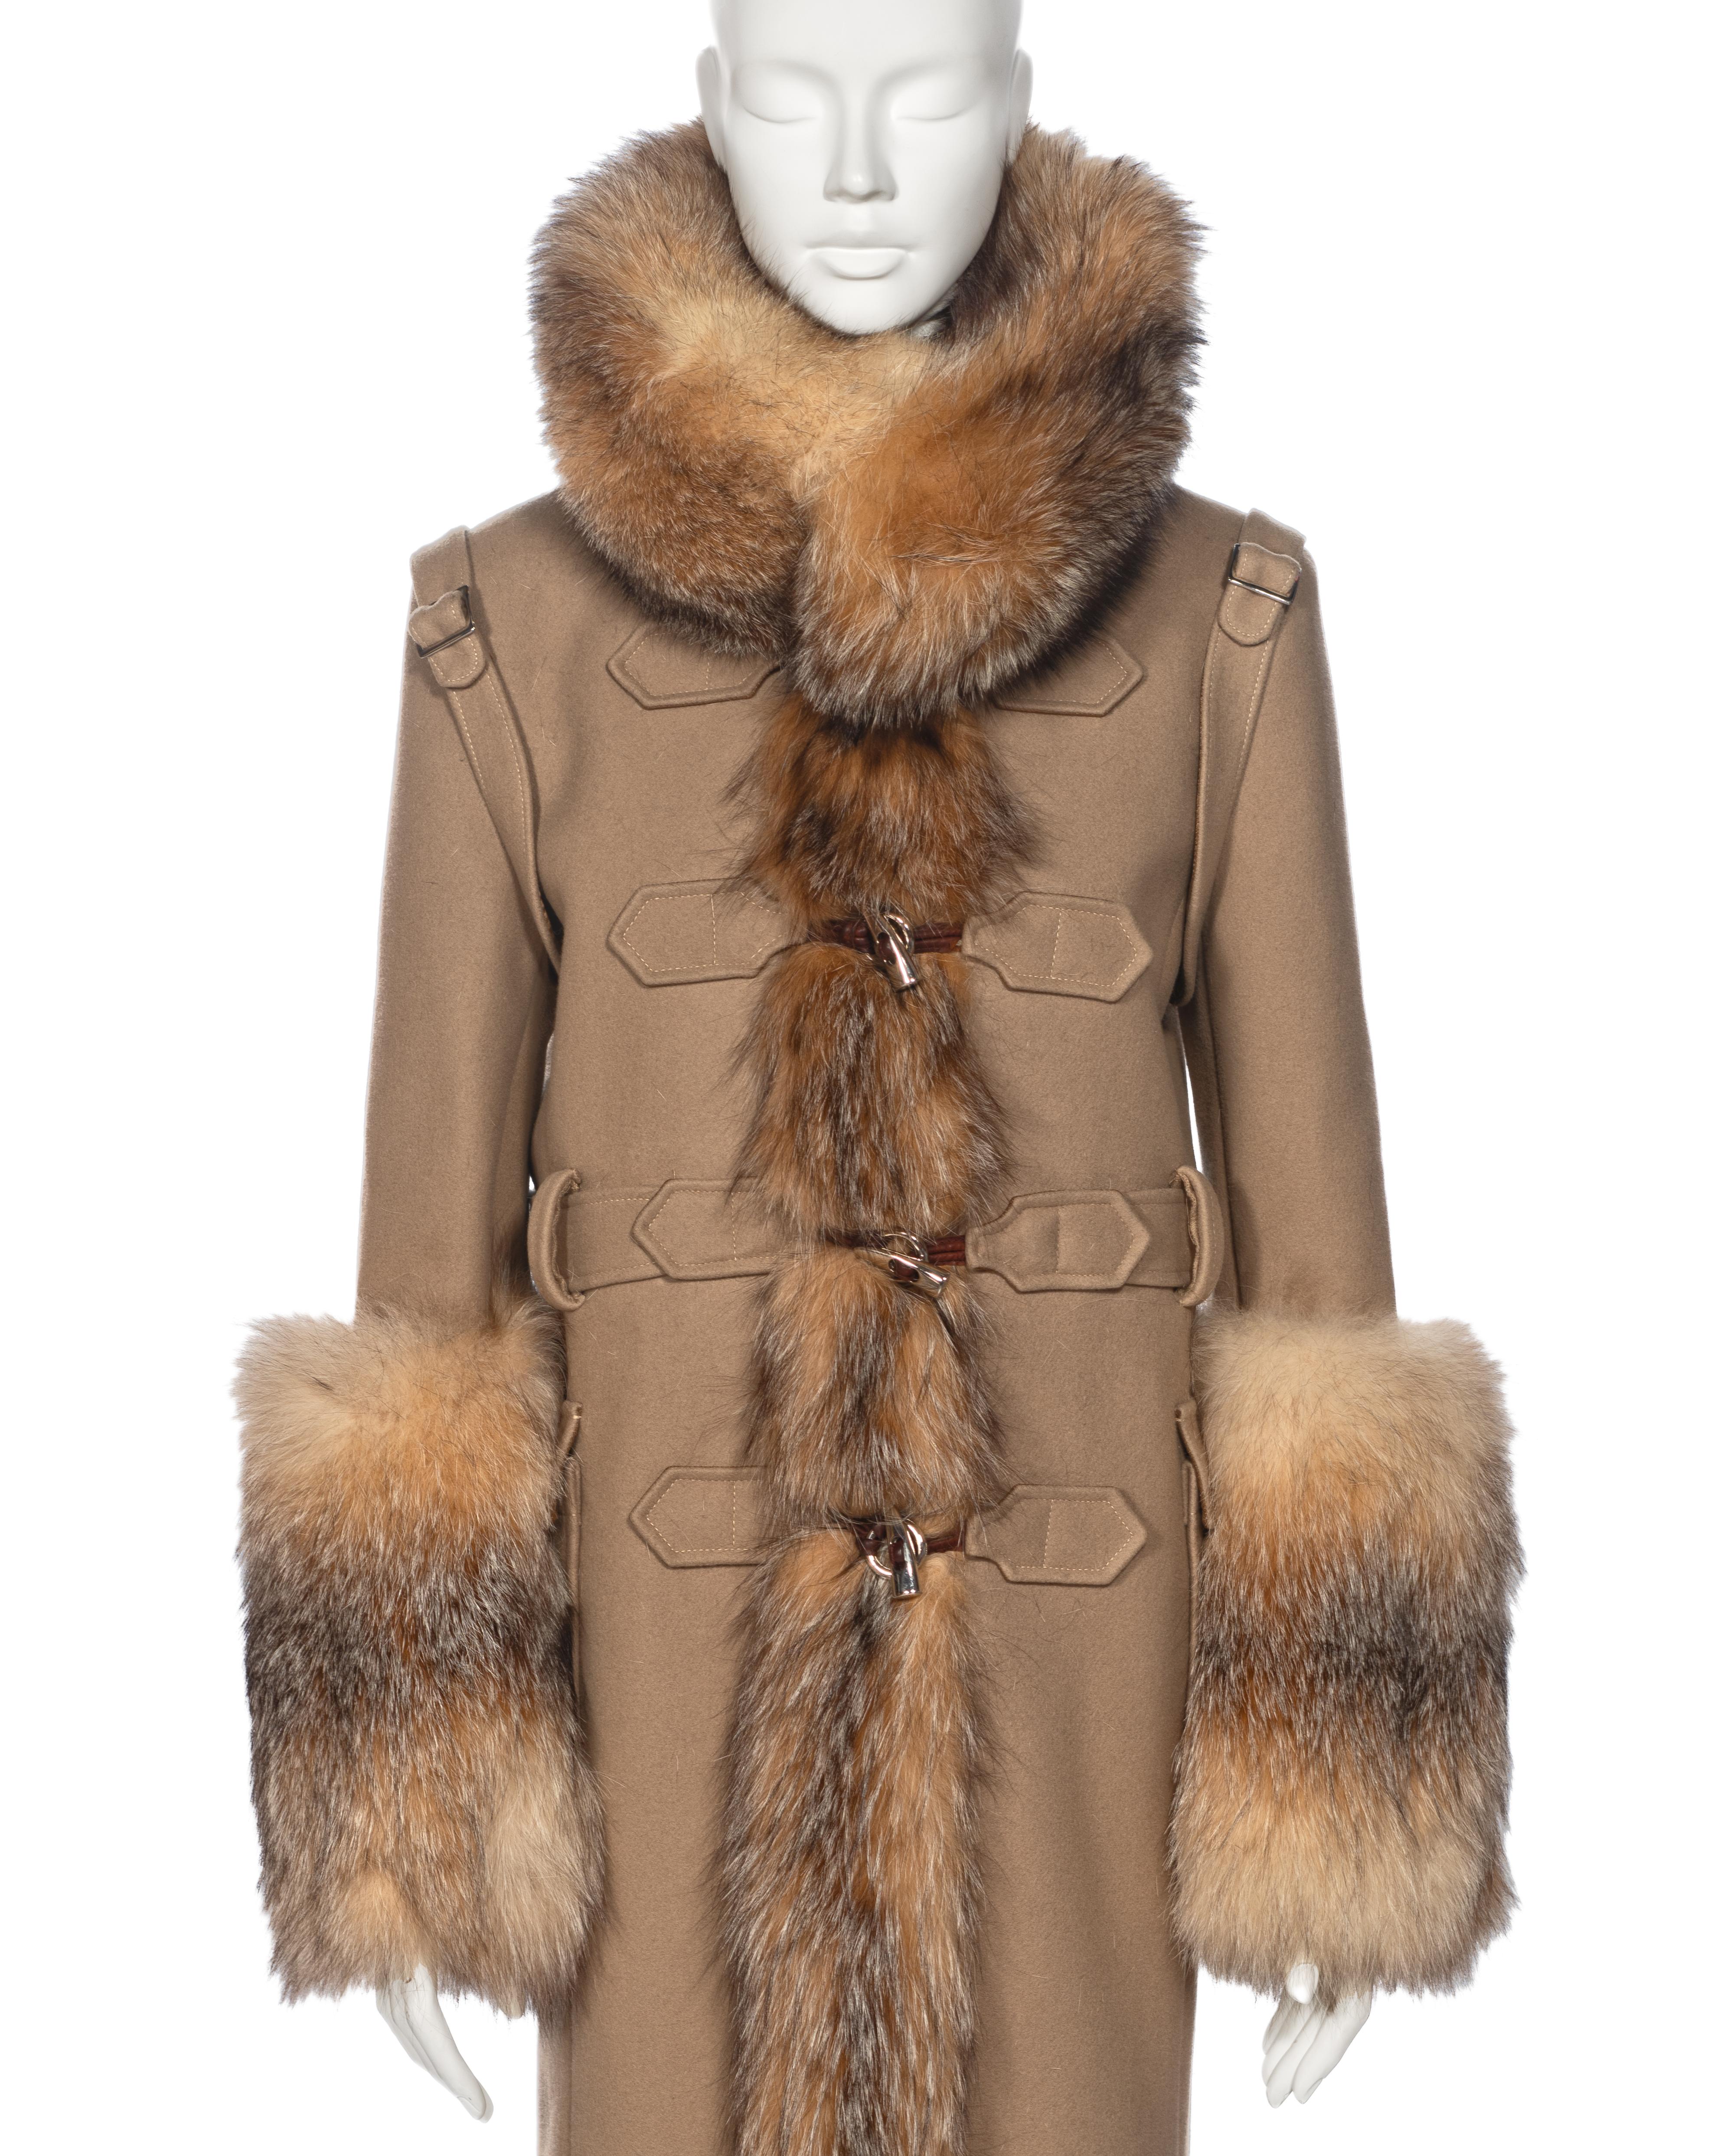 Women's Balenciaga by Nicolas Ghesquière Fur-Trimmed Felted Wool Duffle Coat, fw 2005 For Sale